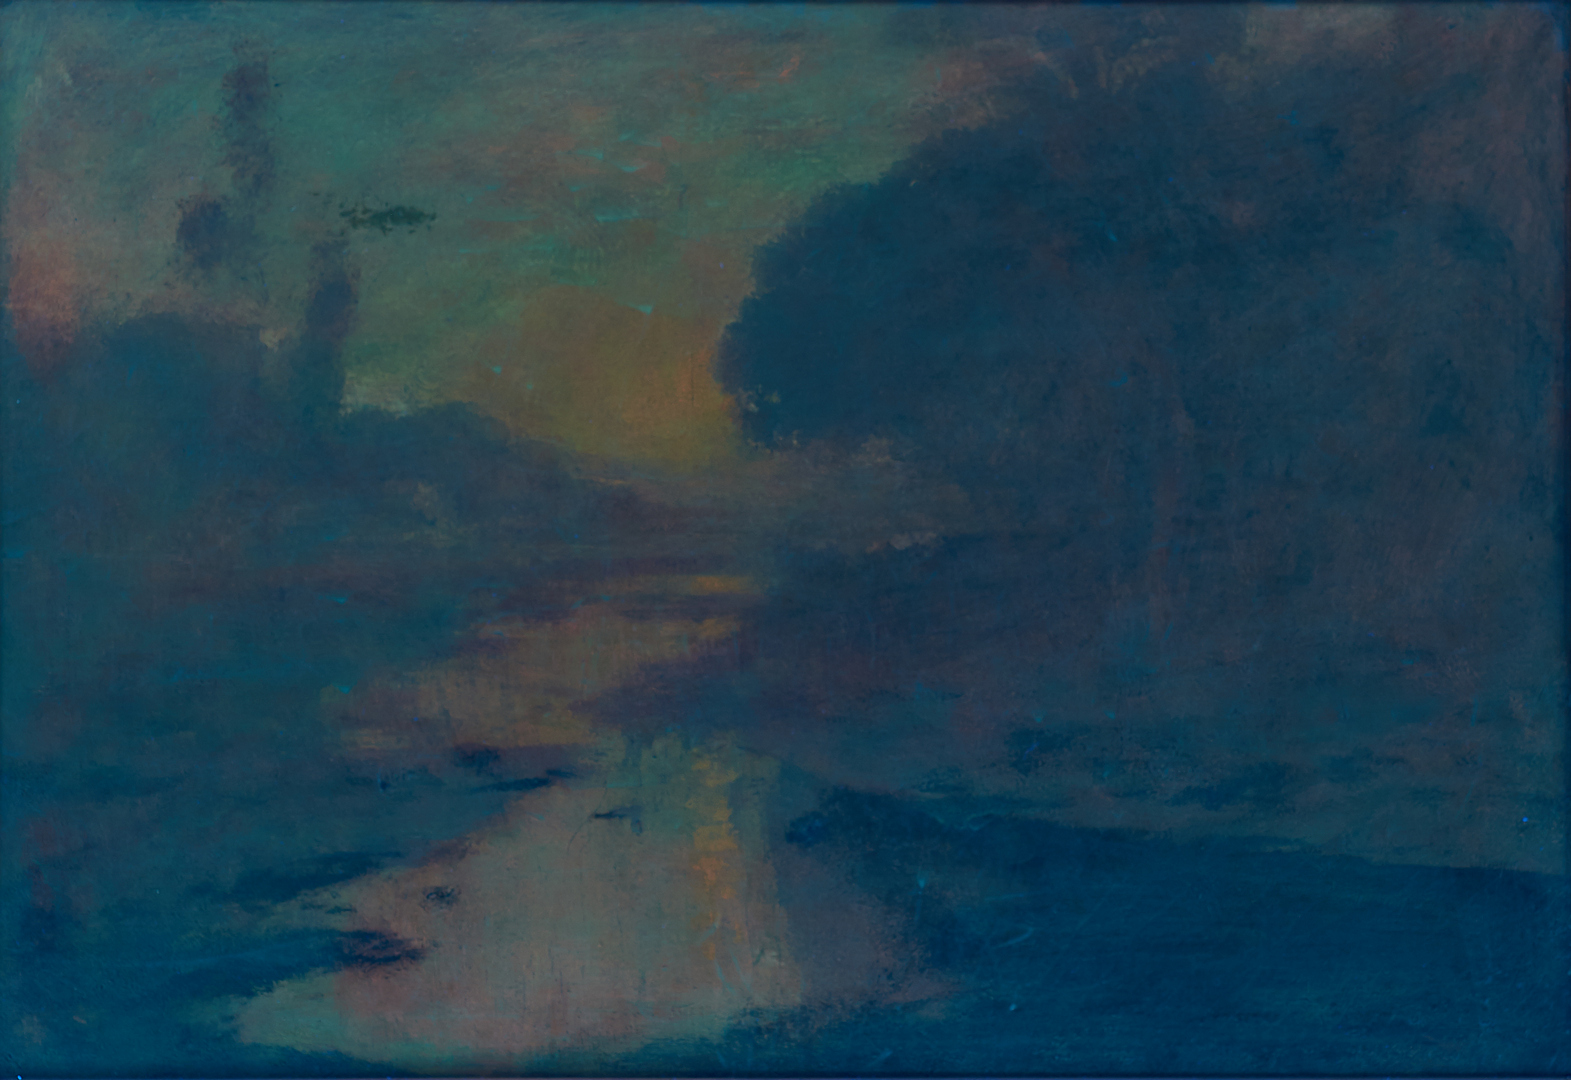 Lot 297: William Keith O/C, River Landscape at Sunset